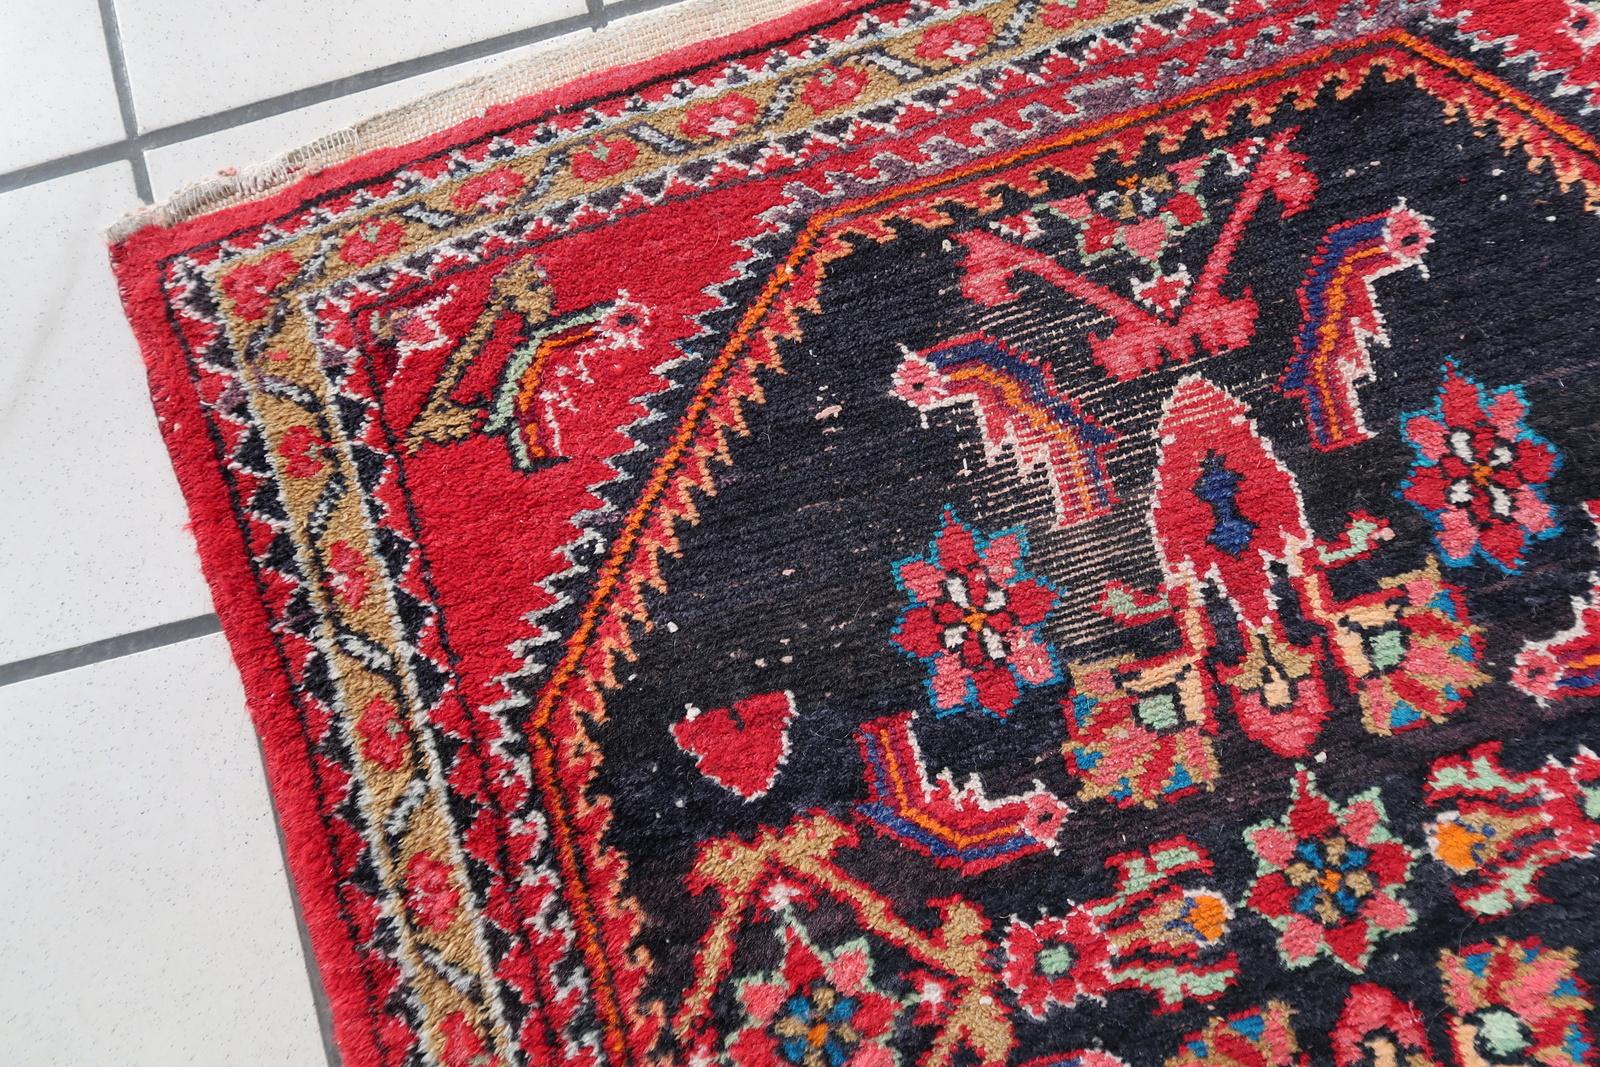 Handmade Vintage Persian Hamadan Rug:

Design and Aesthetics:
Originating from the 1960s, this rug carries a rich history and timeless appeal.
Measuring 74cm x 129cm (approximately 2.4’ x 4.2’), it’s a compact yet impactful piece.
Colors: The